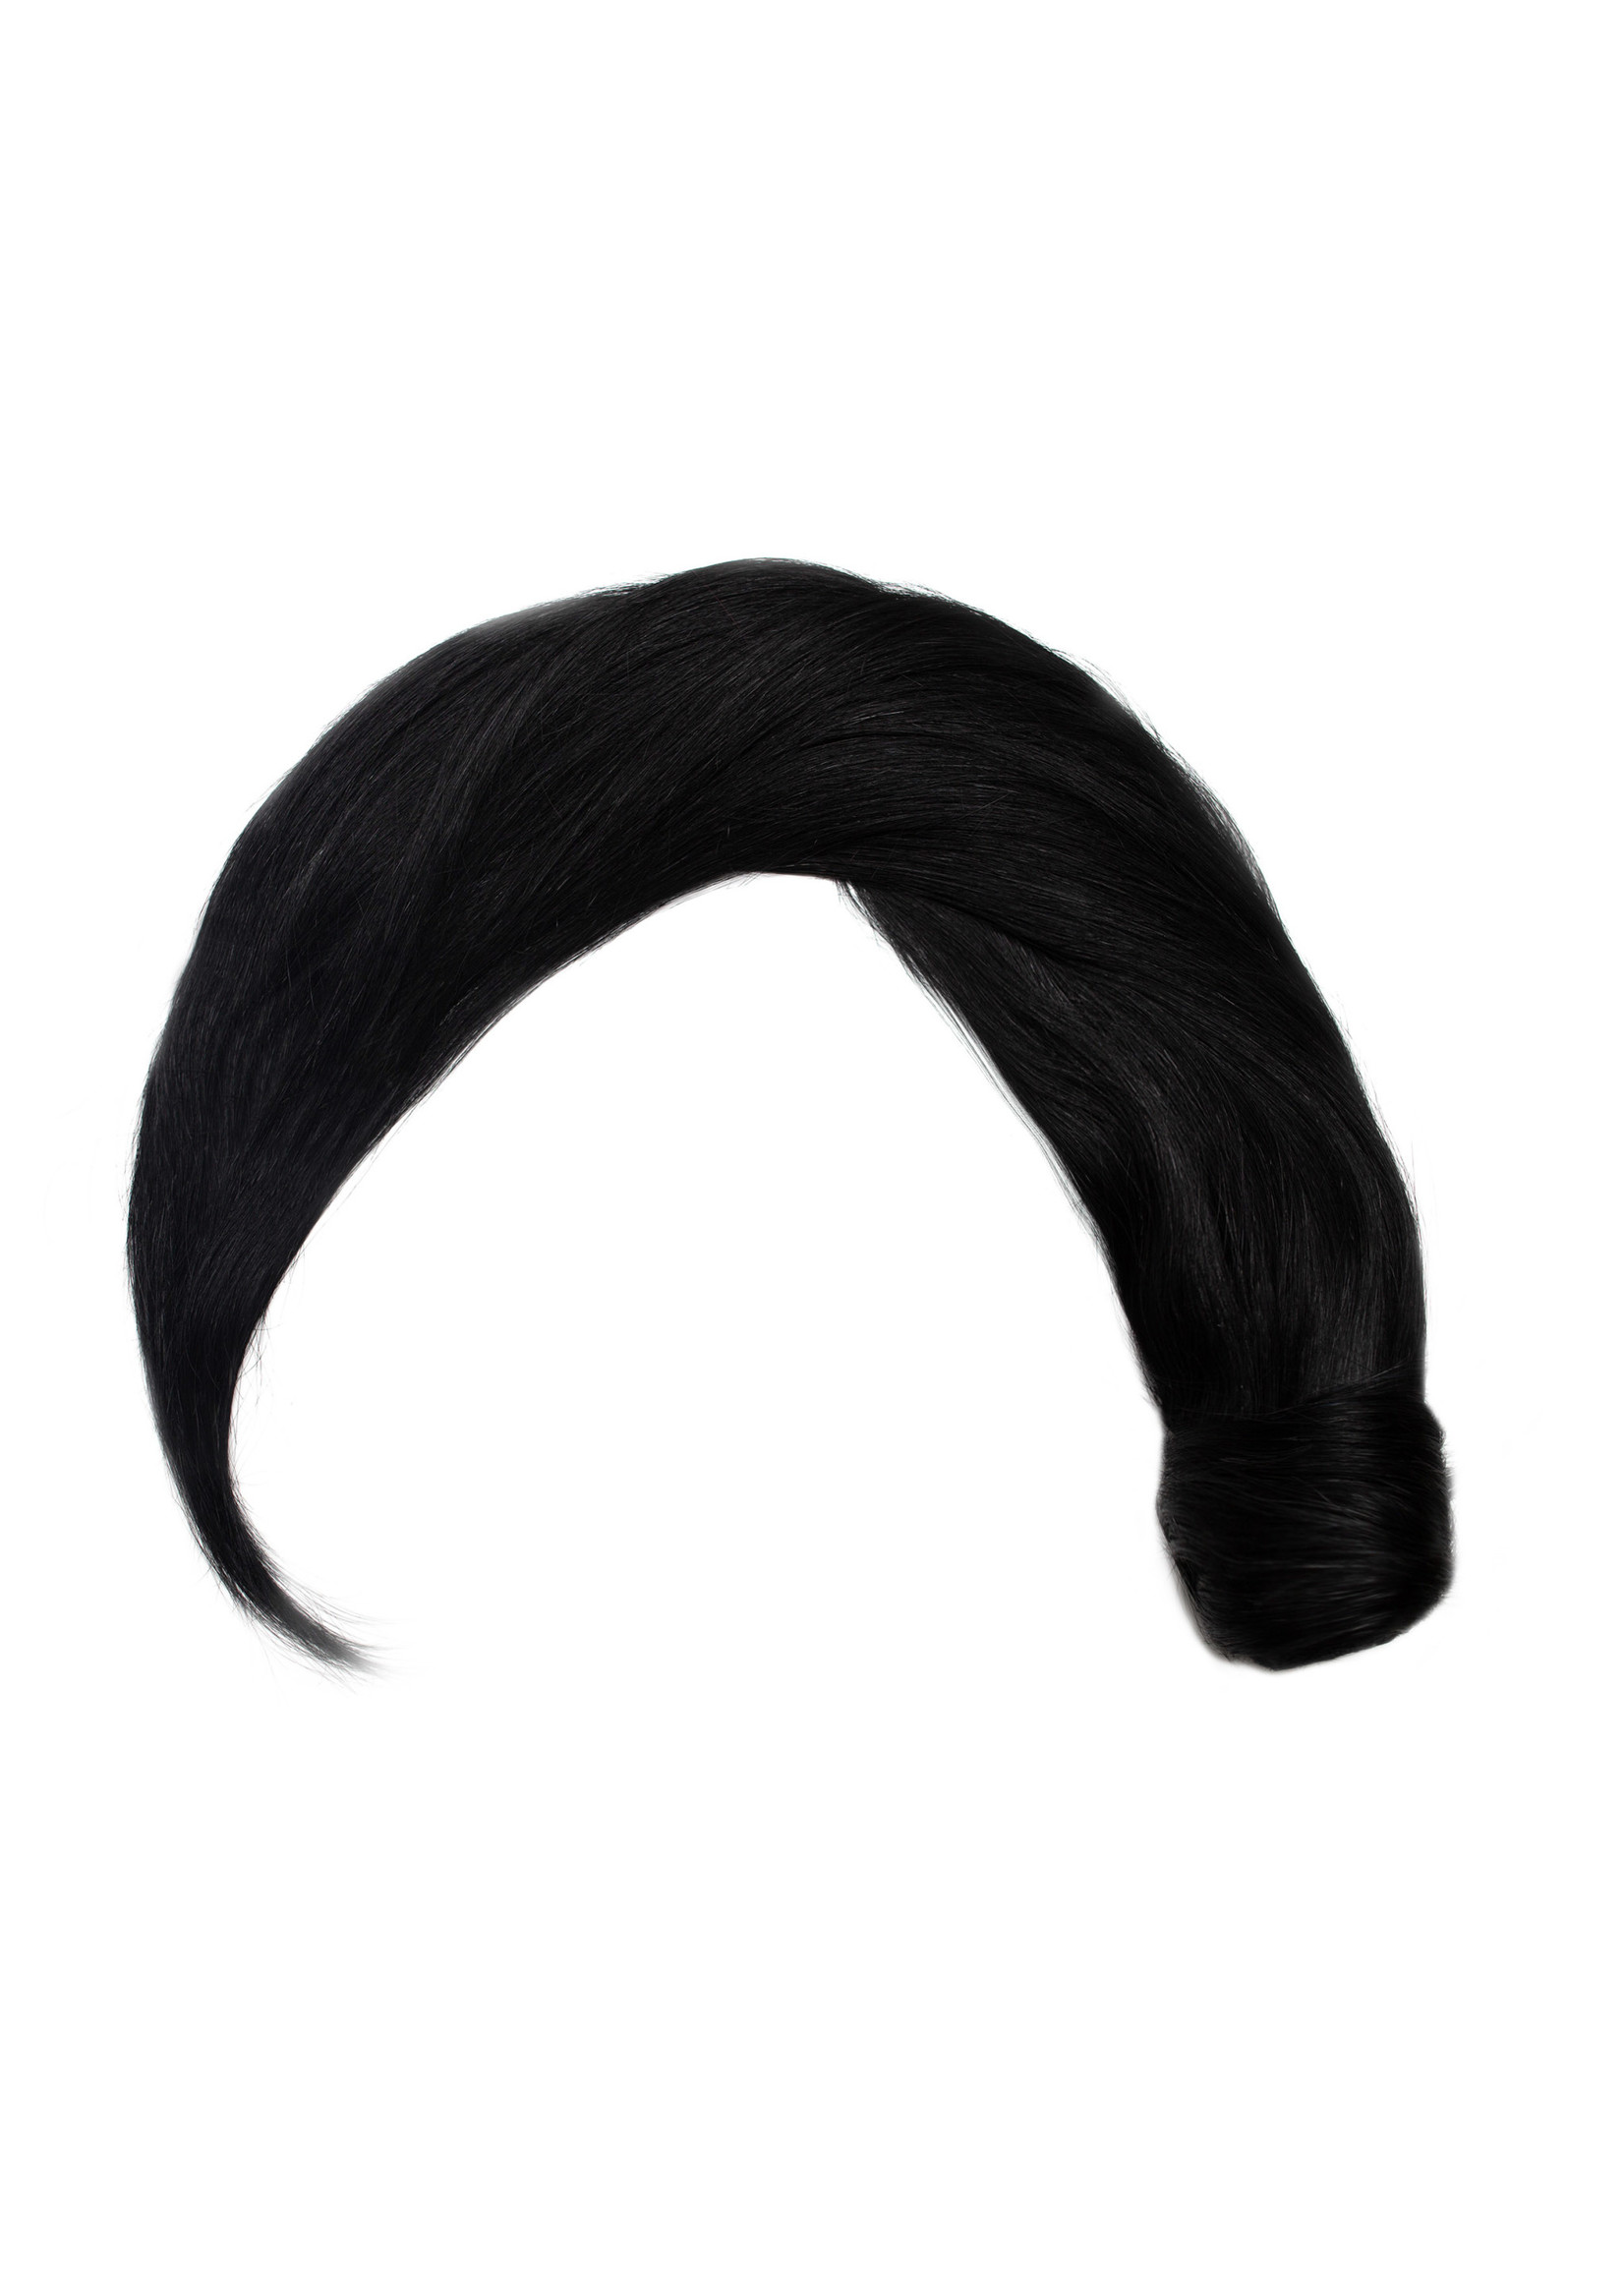 Seamless1 Seamless1 Ponytail Human Hair Extension 21.5 Inches - Midnight